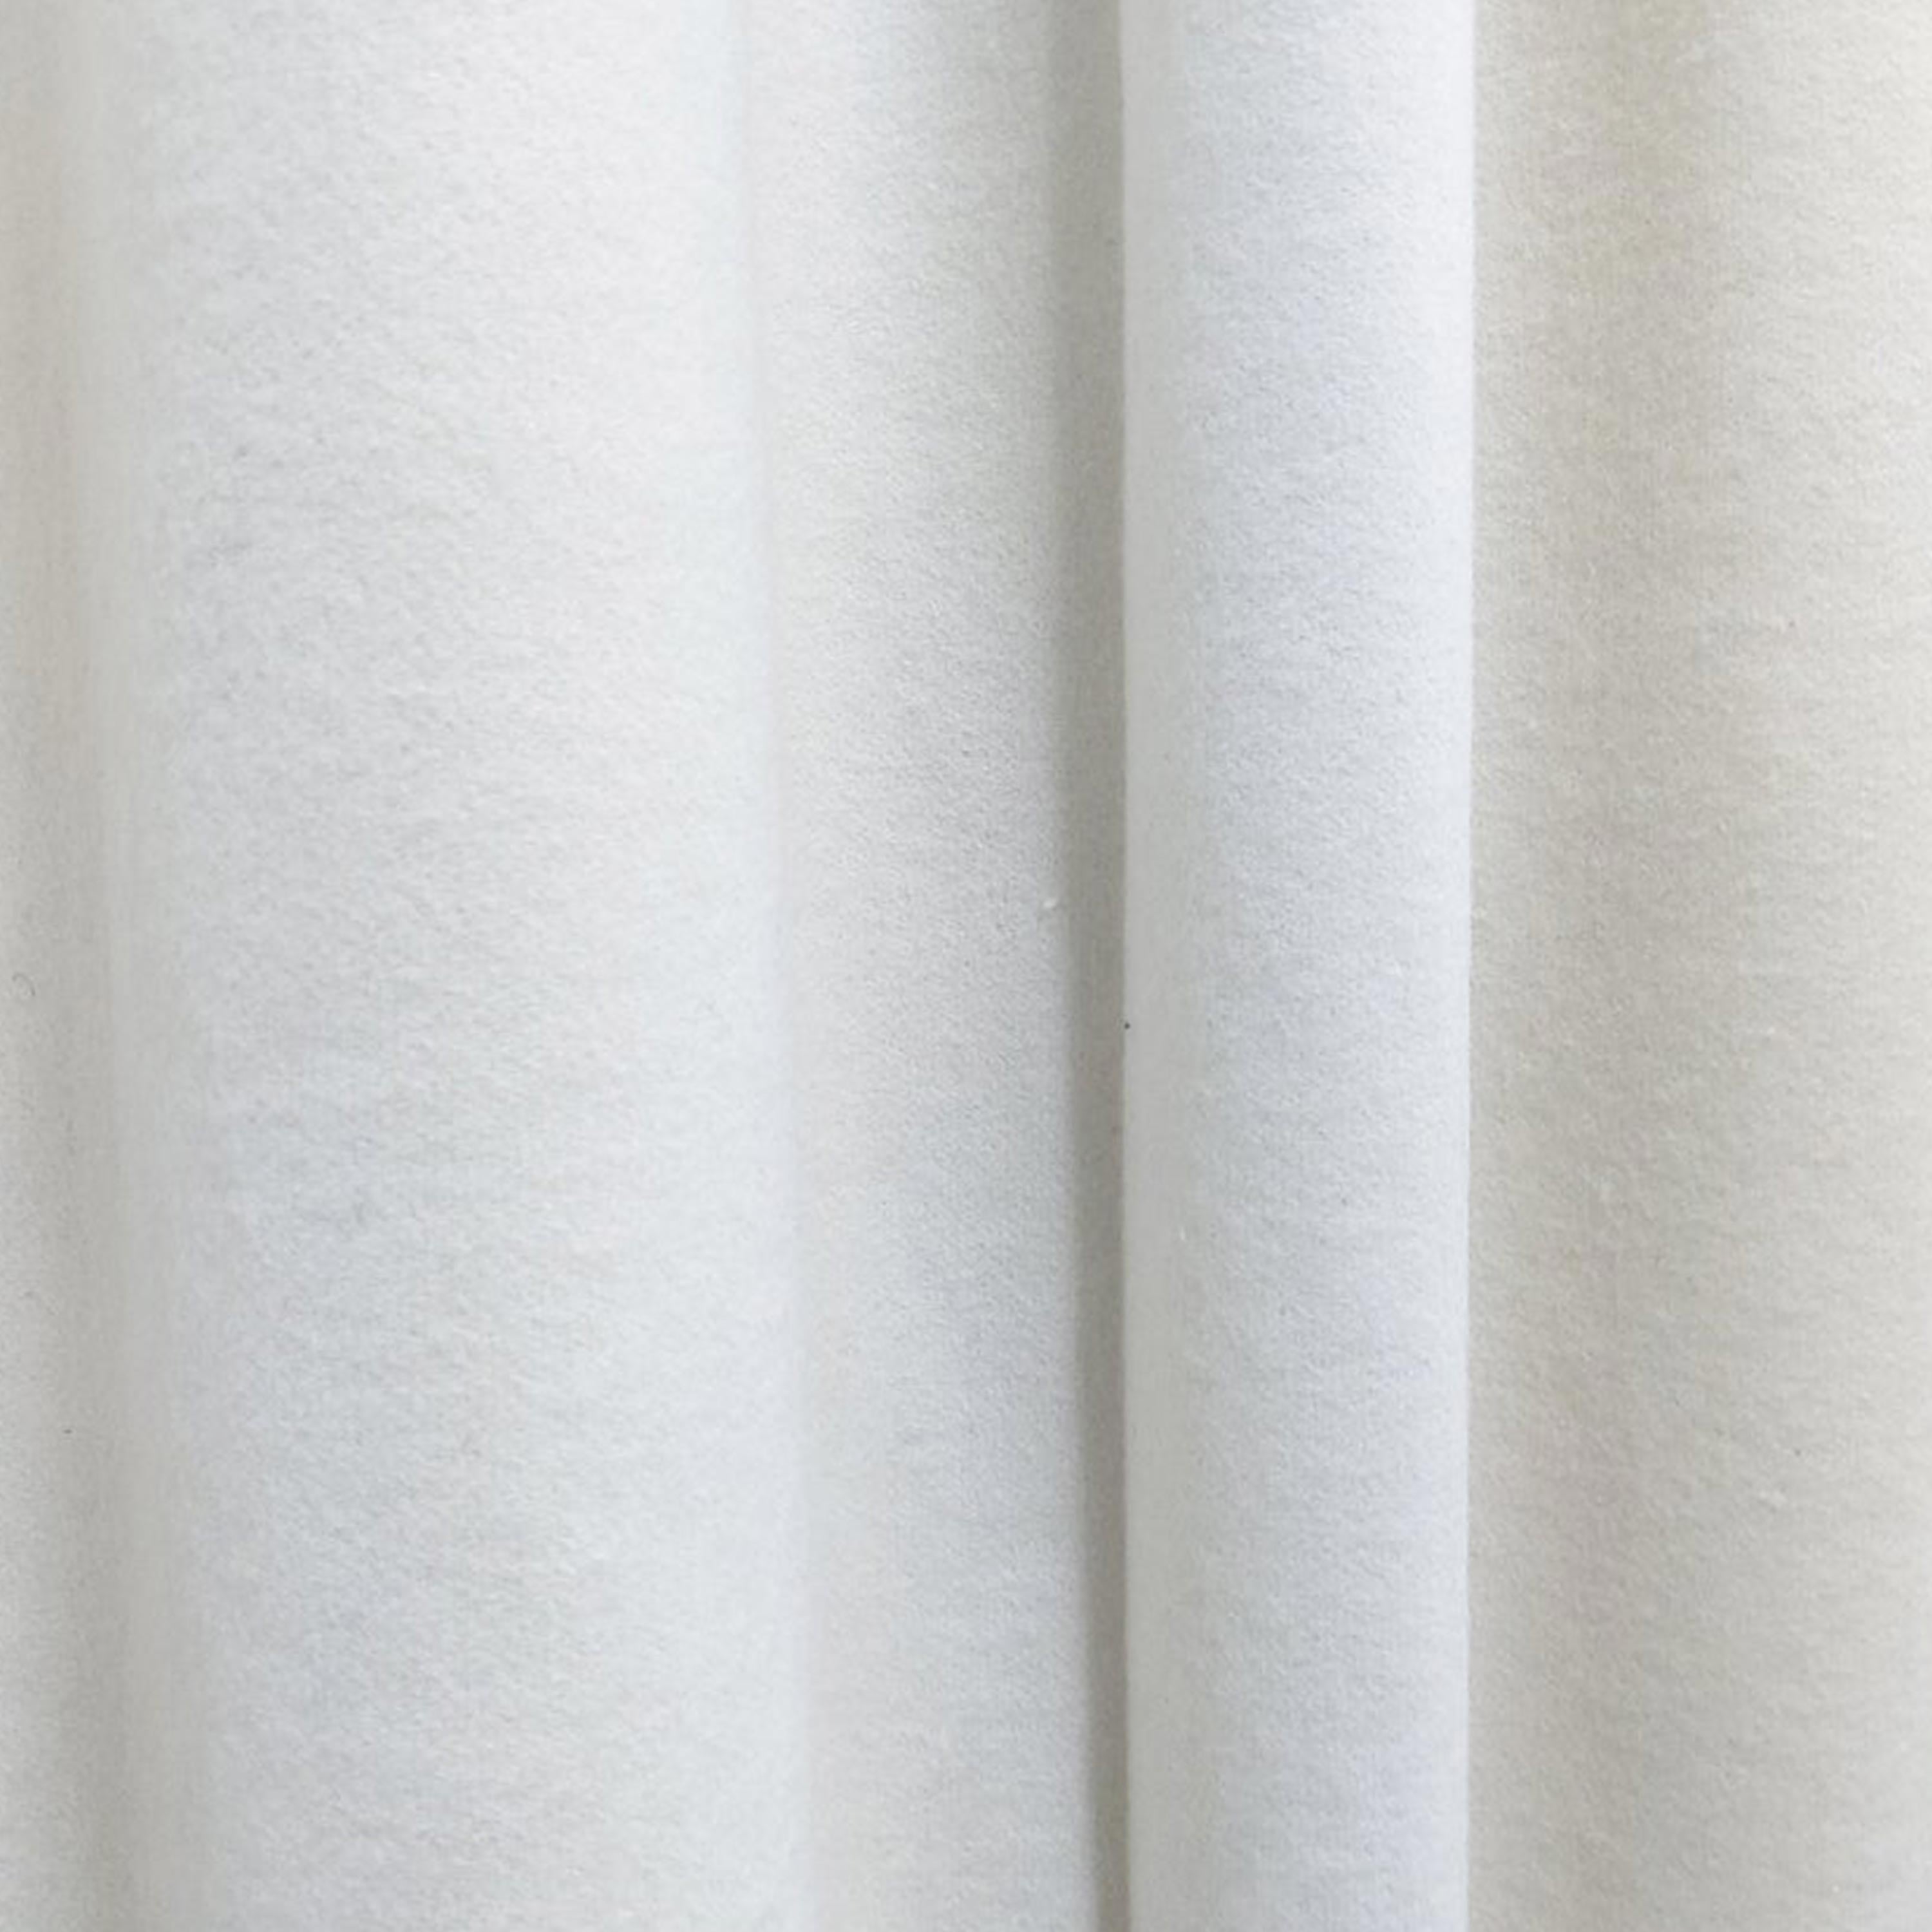 Wool Felt Curtains with Genuine Leather Tabs